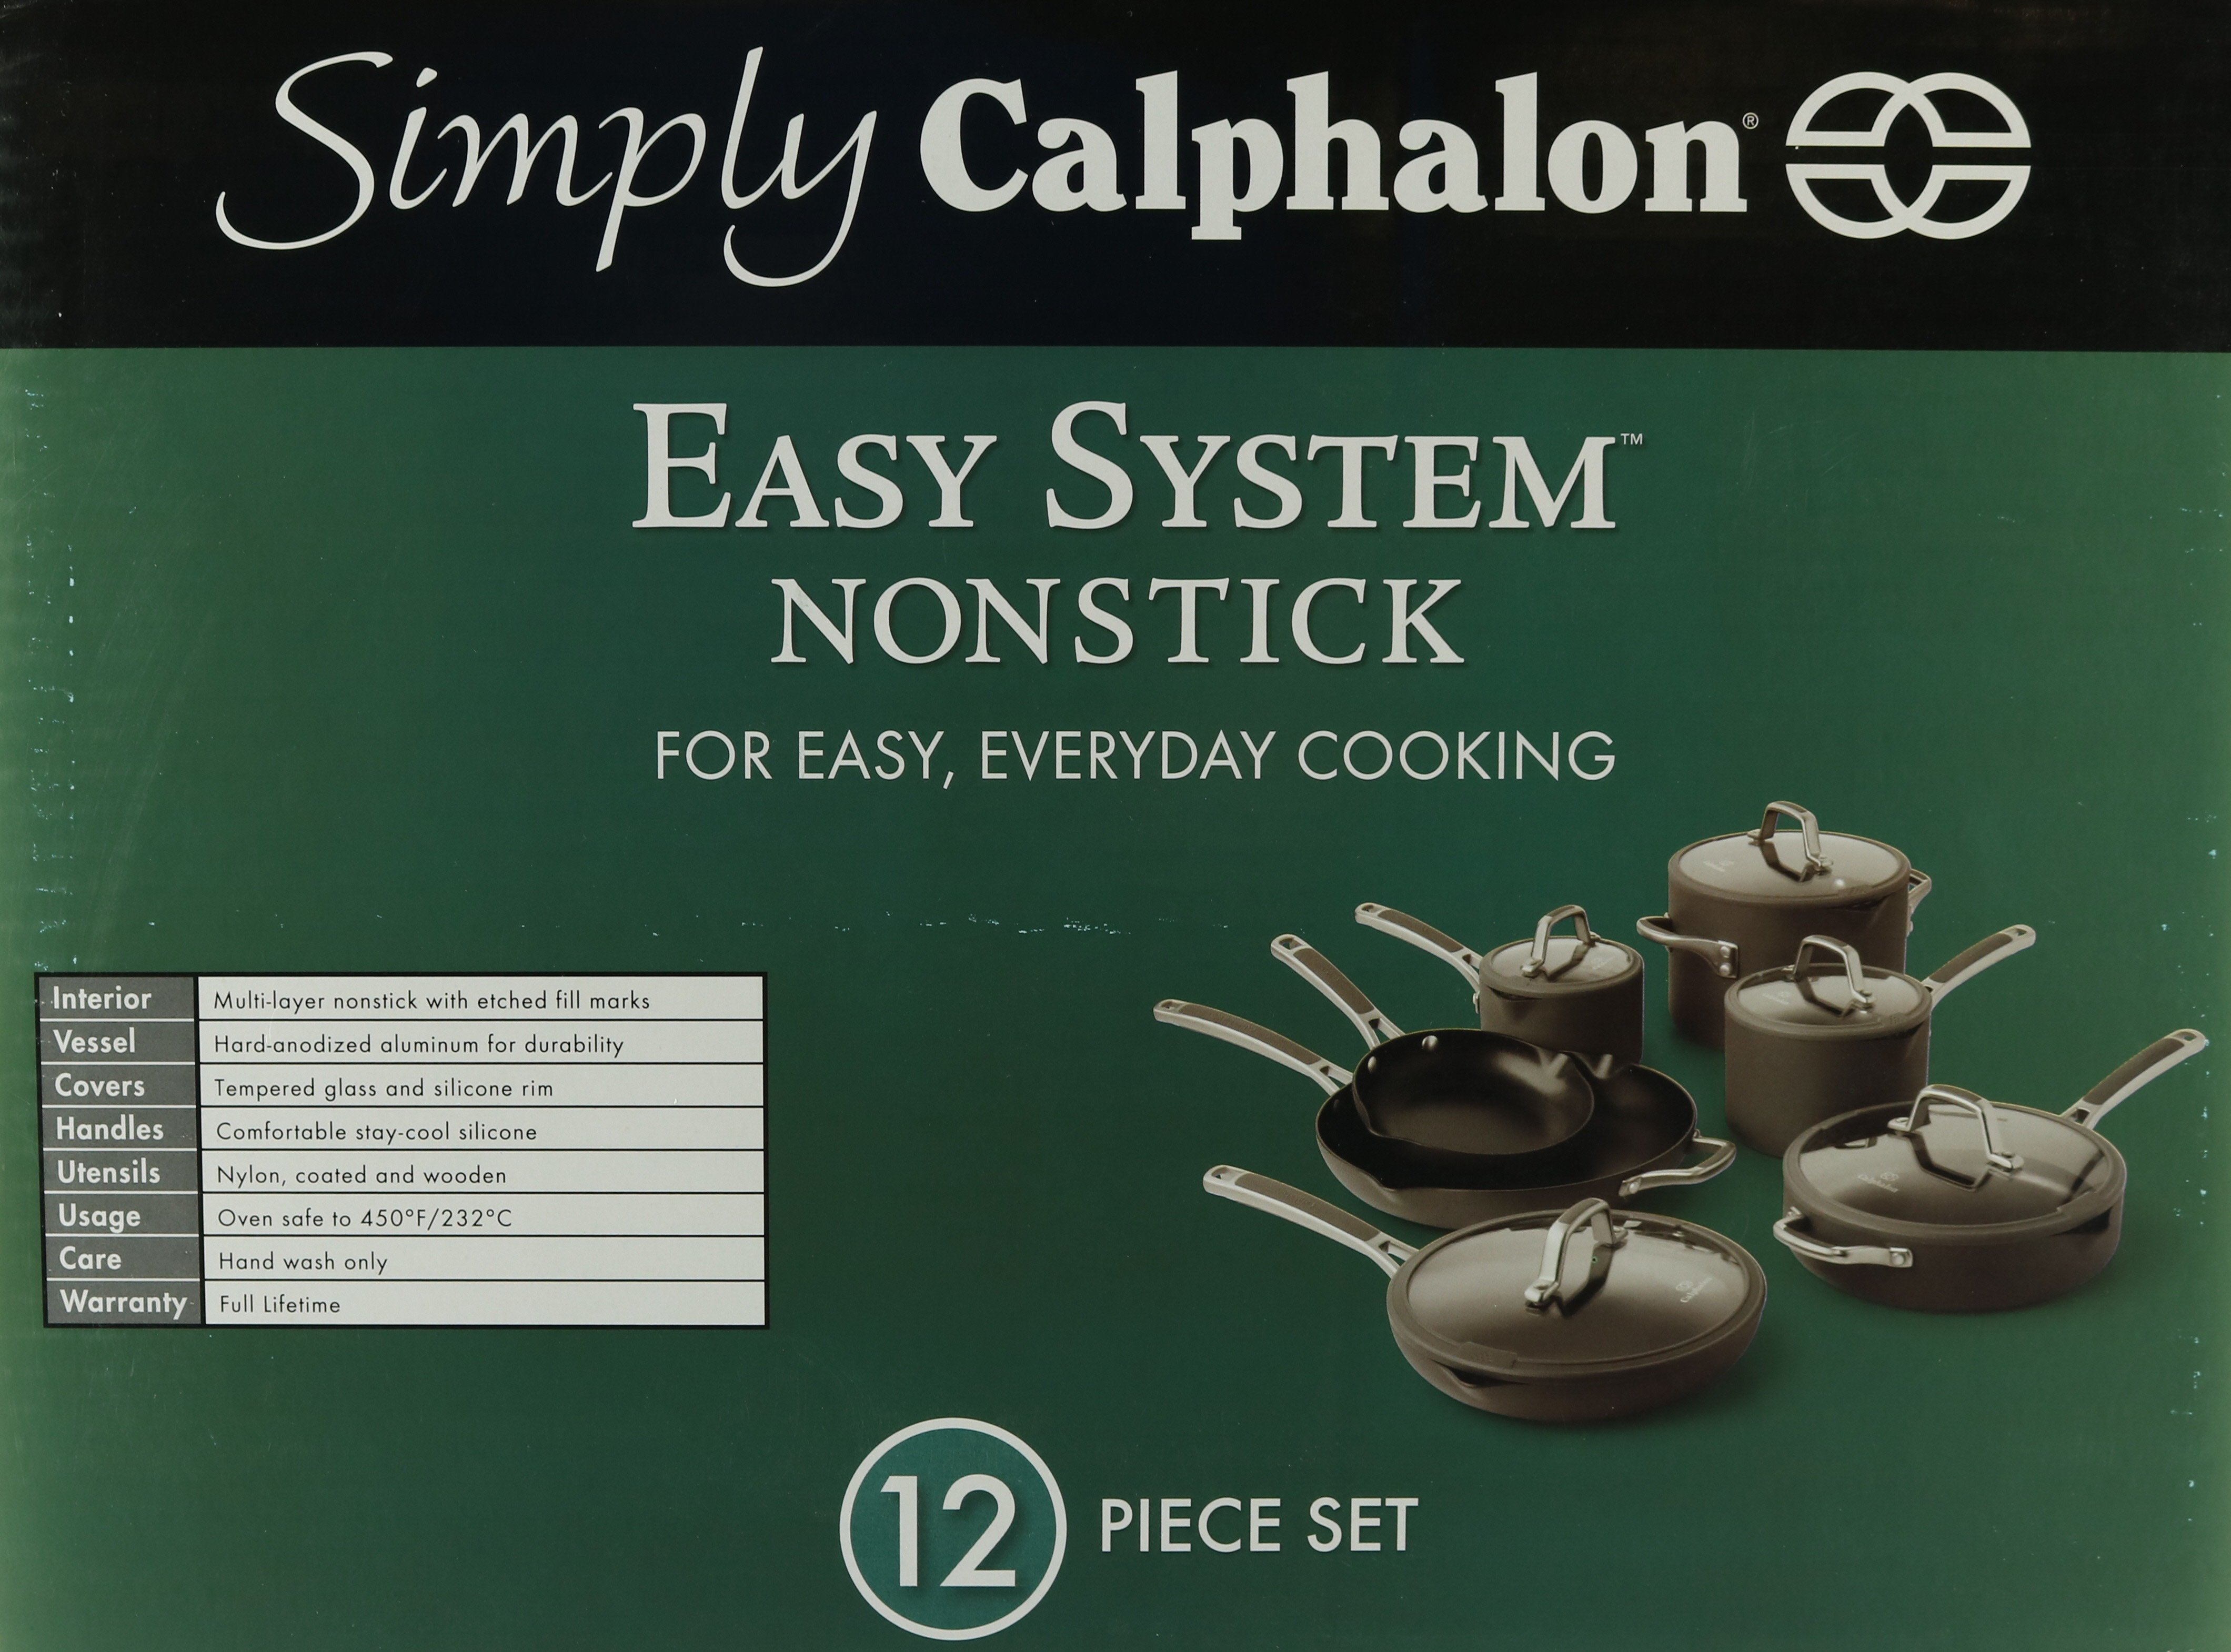 Calphalon 10-Piece Nonstick Kitchen Cookware Set with Stay-Cool